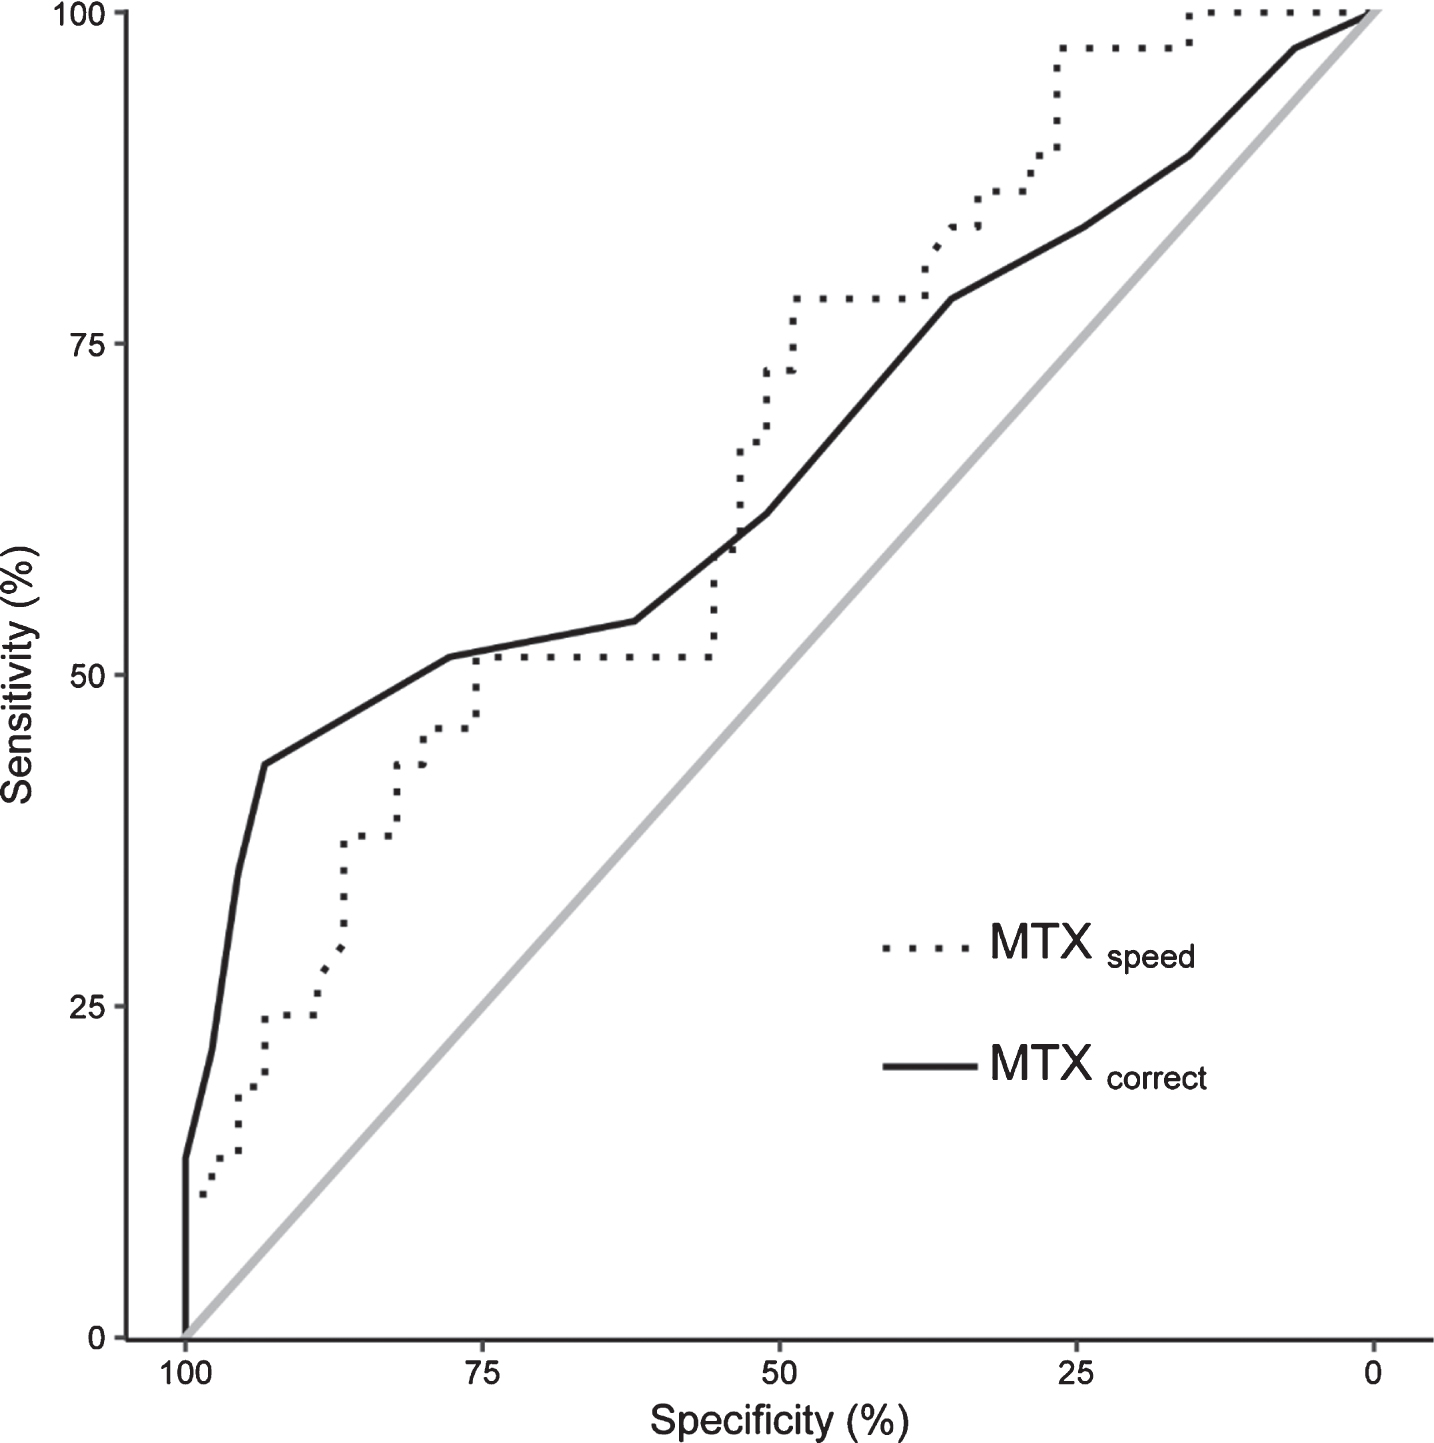 ROC curves of the MTX test outcomes to assess MCI rated by MoCA. The dotted line indicates MTXspeed and the solid line MTXcorrect. The grey line represents the reference line of 0.5.